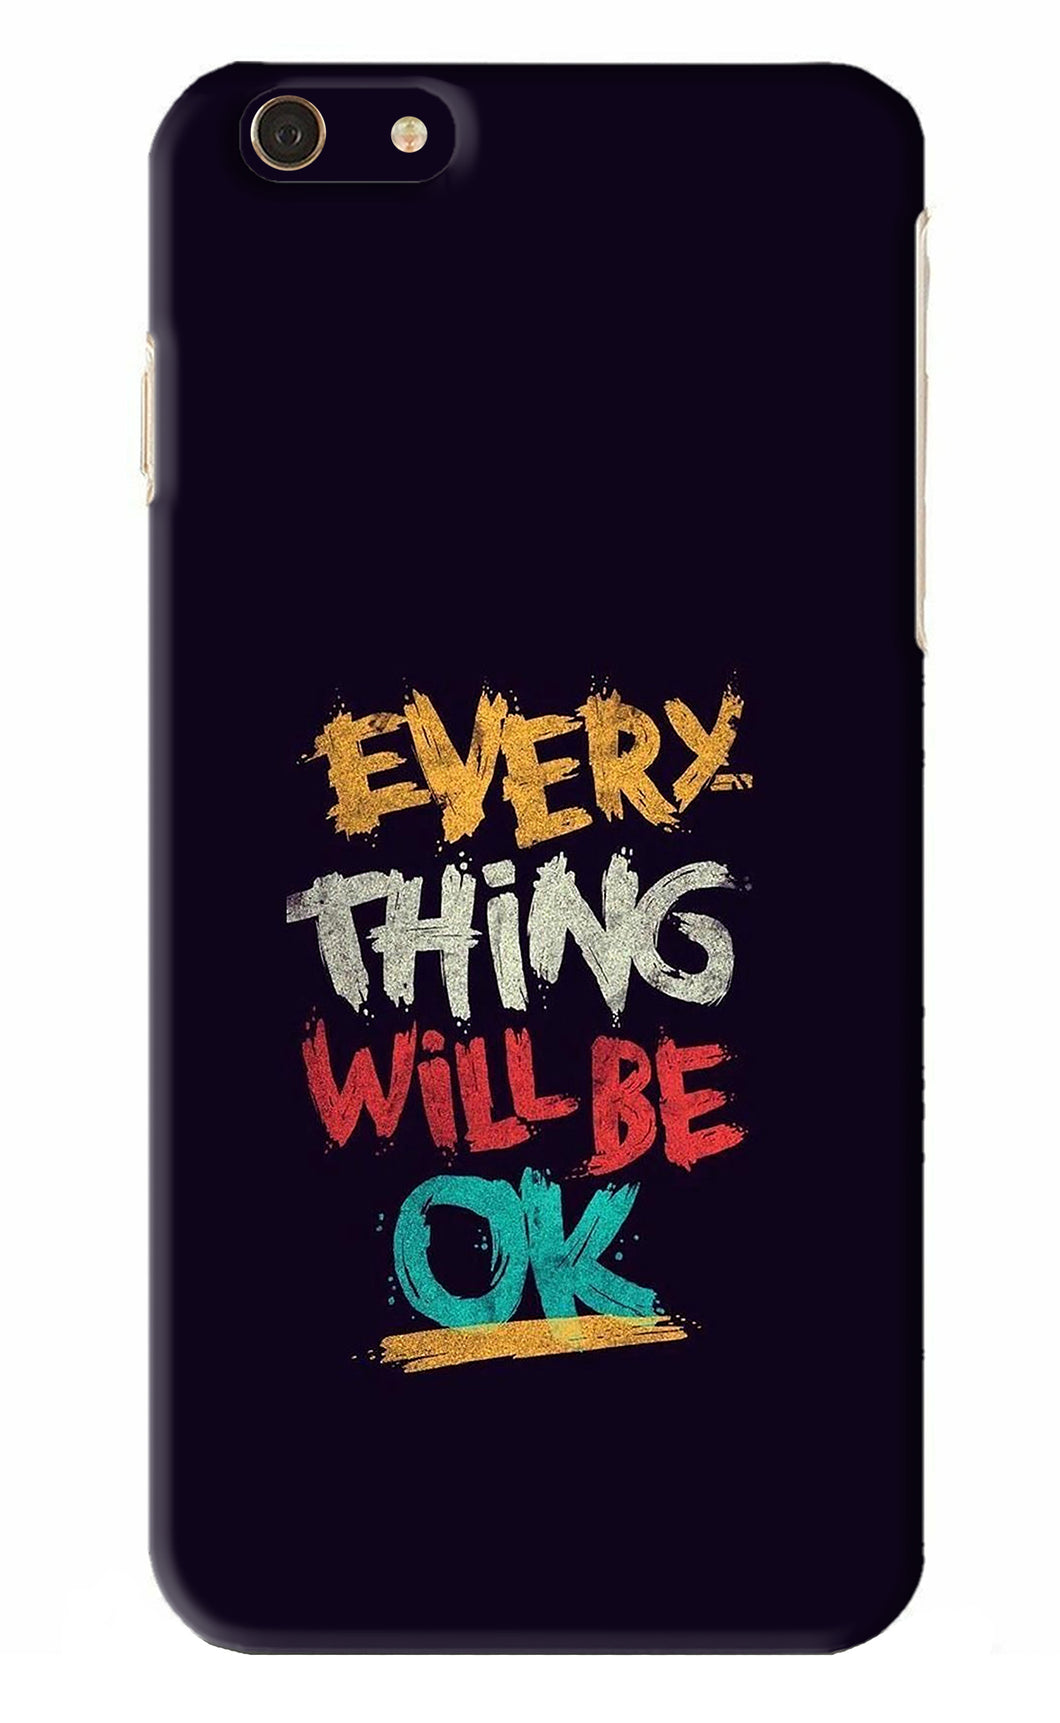 Everything Will Be Ok iPhone 6 Plus Back Skin Wrap